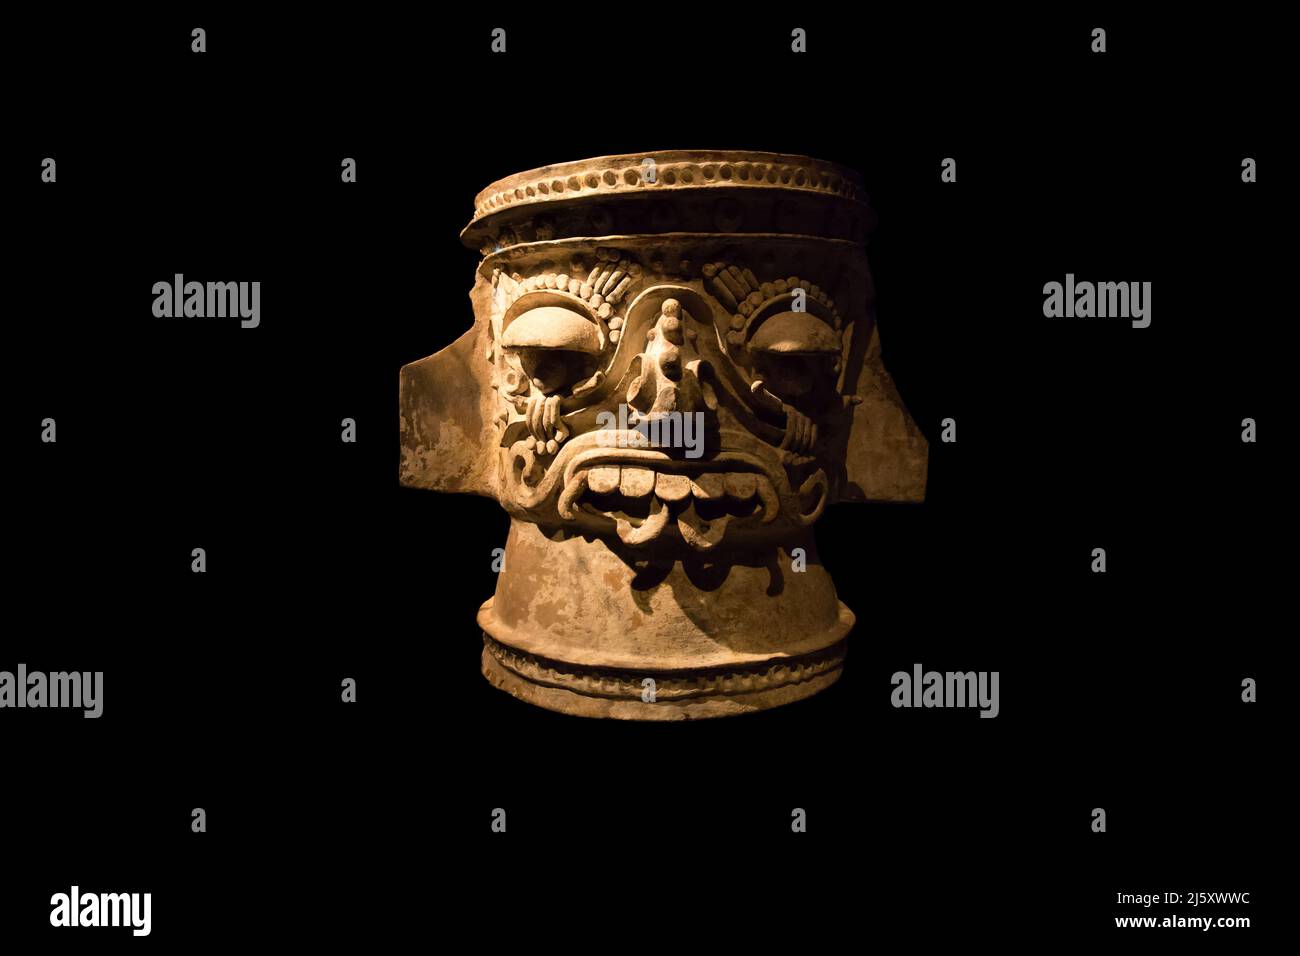 Leiden, The Netherlands - SEP 01, 2021: a large ceramic brazier depicting the rain god Tlaloc decorated in Toltec style. Found close to templo mayor, Stock Photo